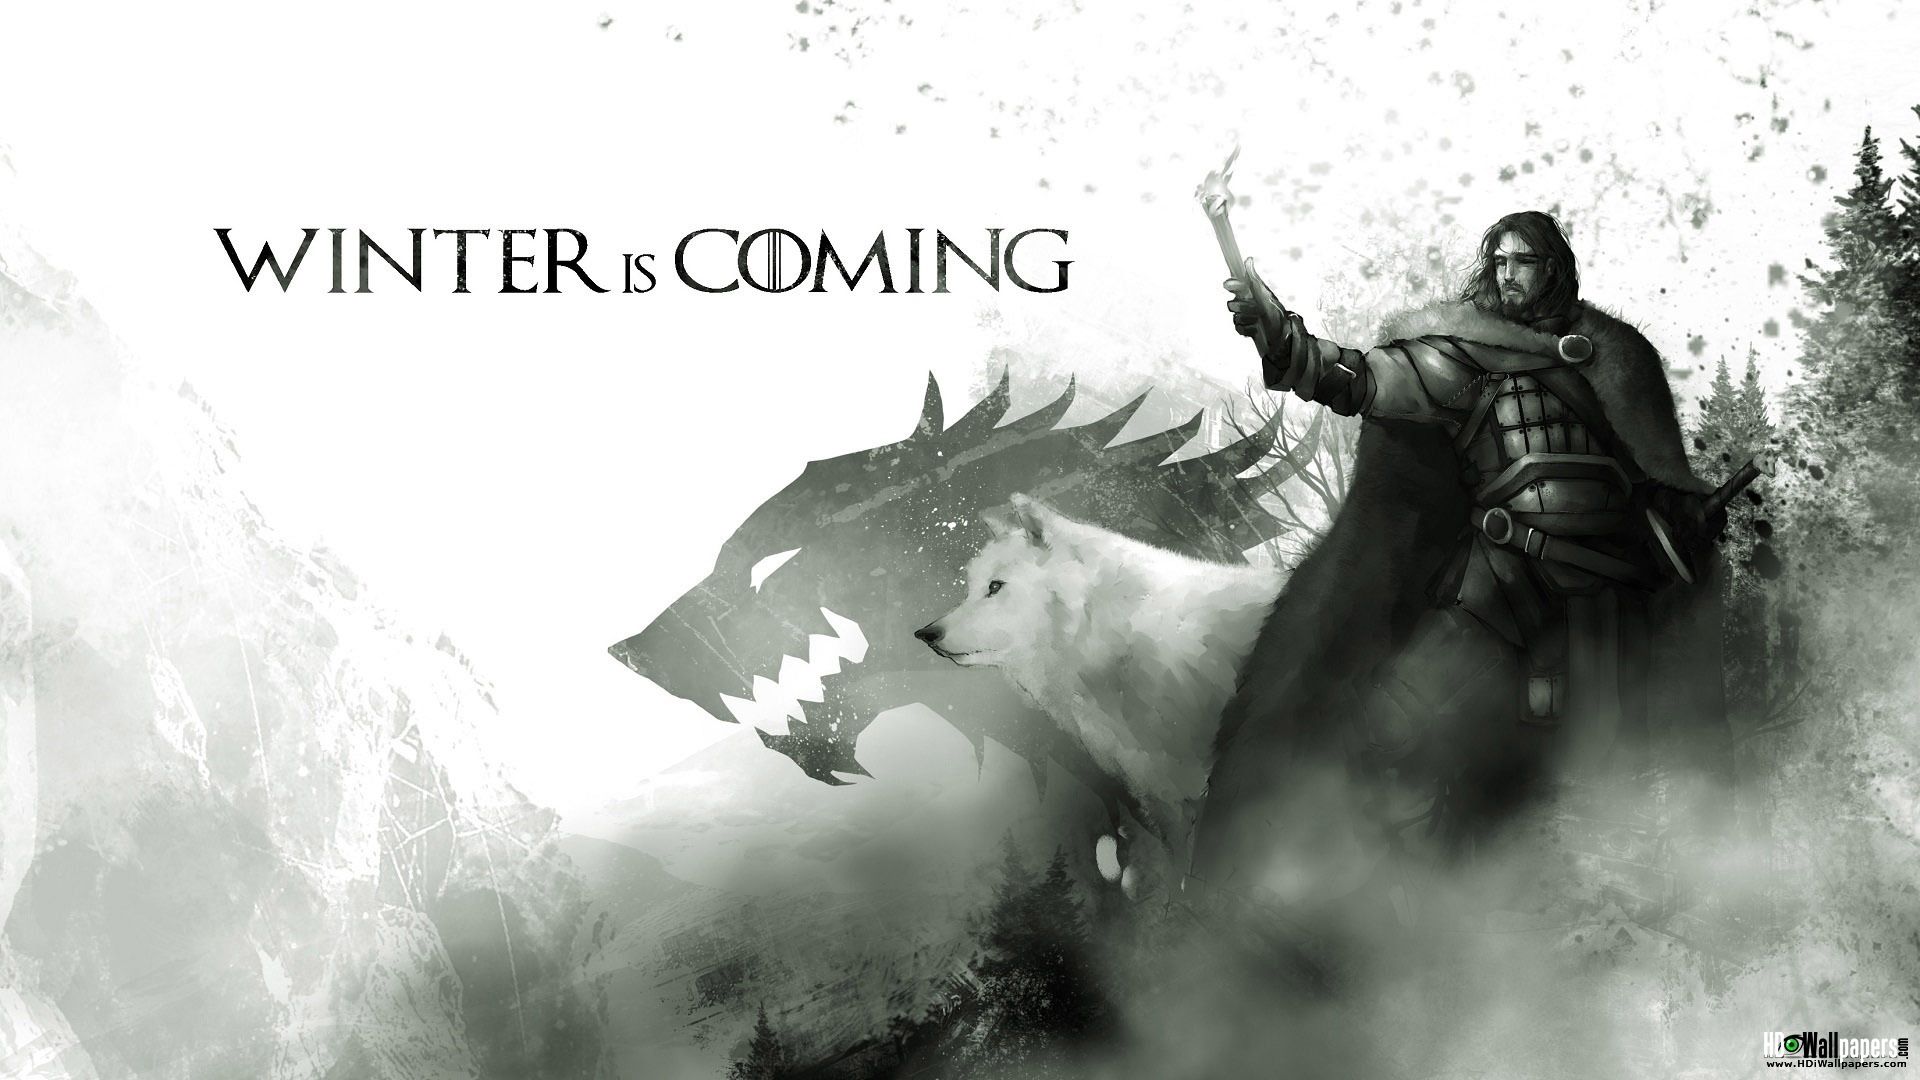 Winter Is Coming Game of Thrones Wallpaper Free Winter Is Coming Game of Thrones Background